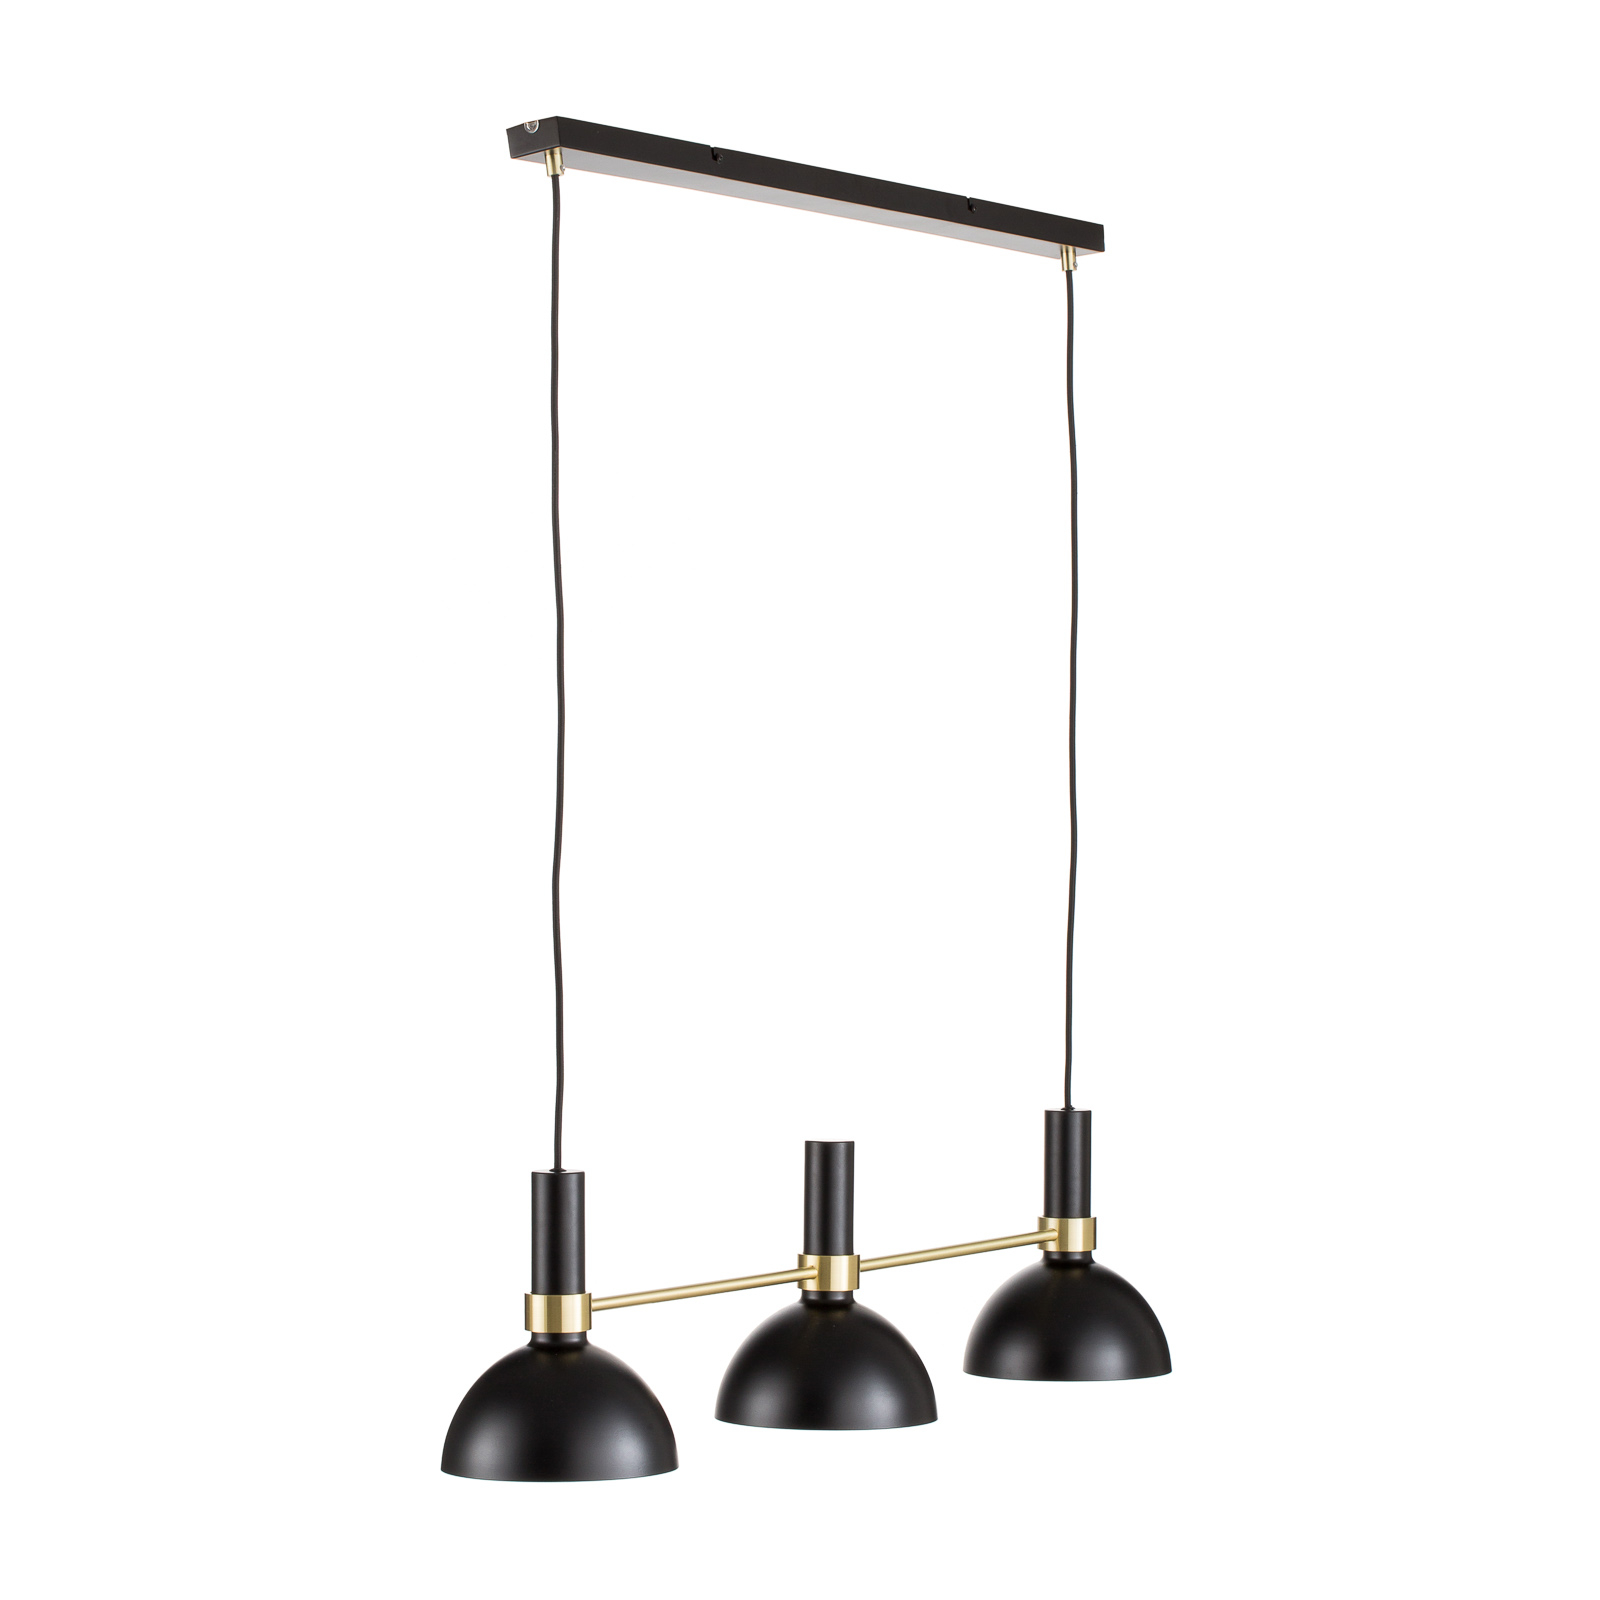 Three-bulb Larry hanging lamp in black and brass